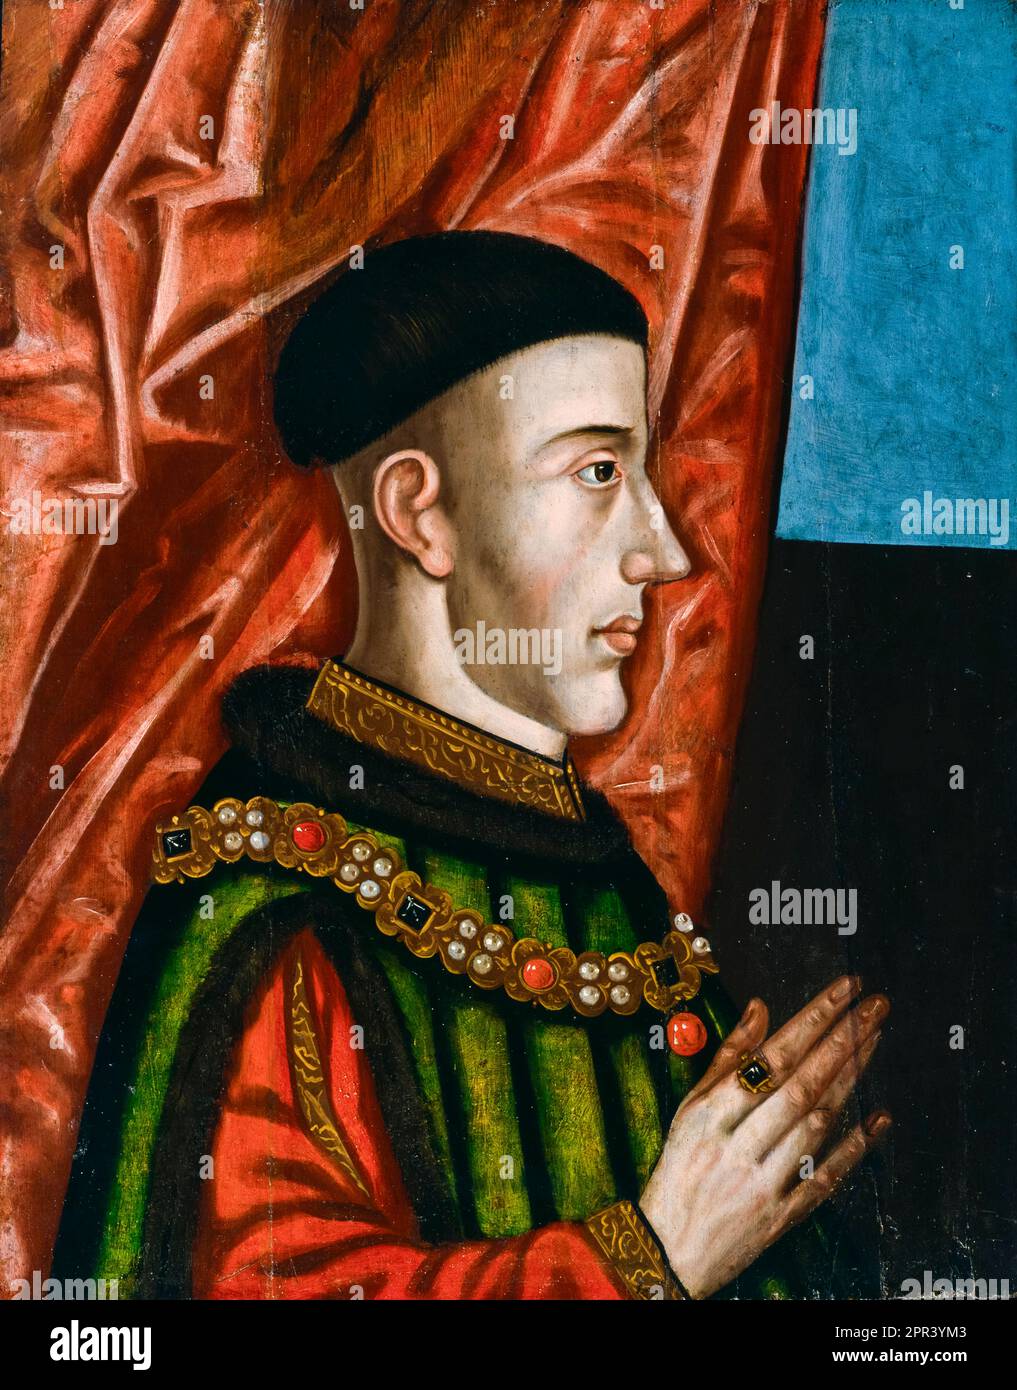 Henry V of England (1386-1422), King of England (1413-1422), portrait painting in oil on panel, before 1626 Stock Photo